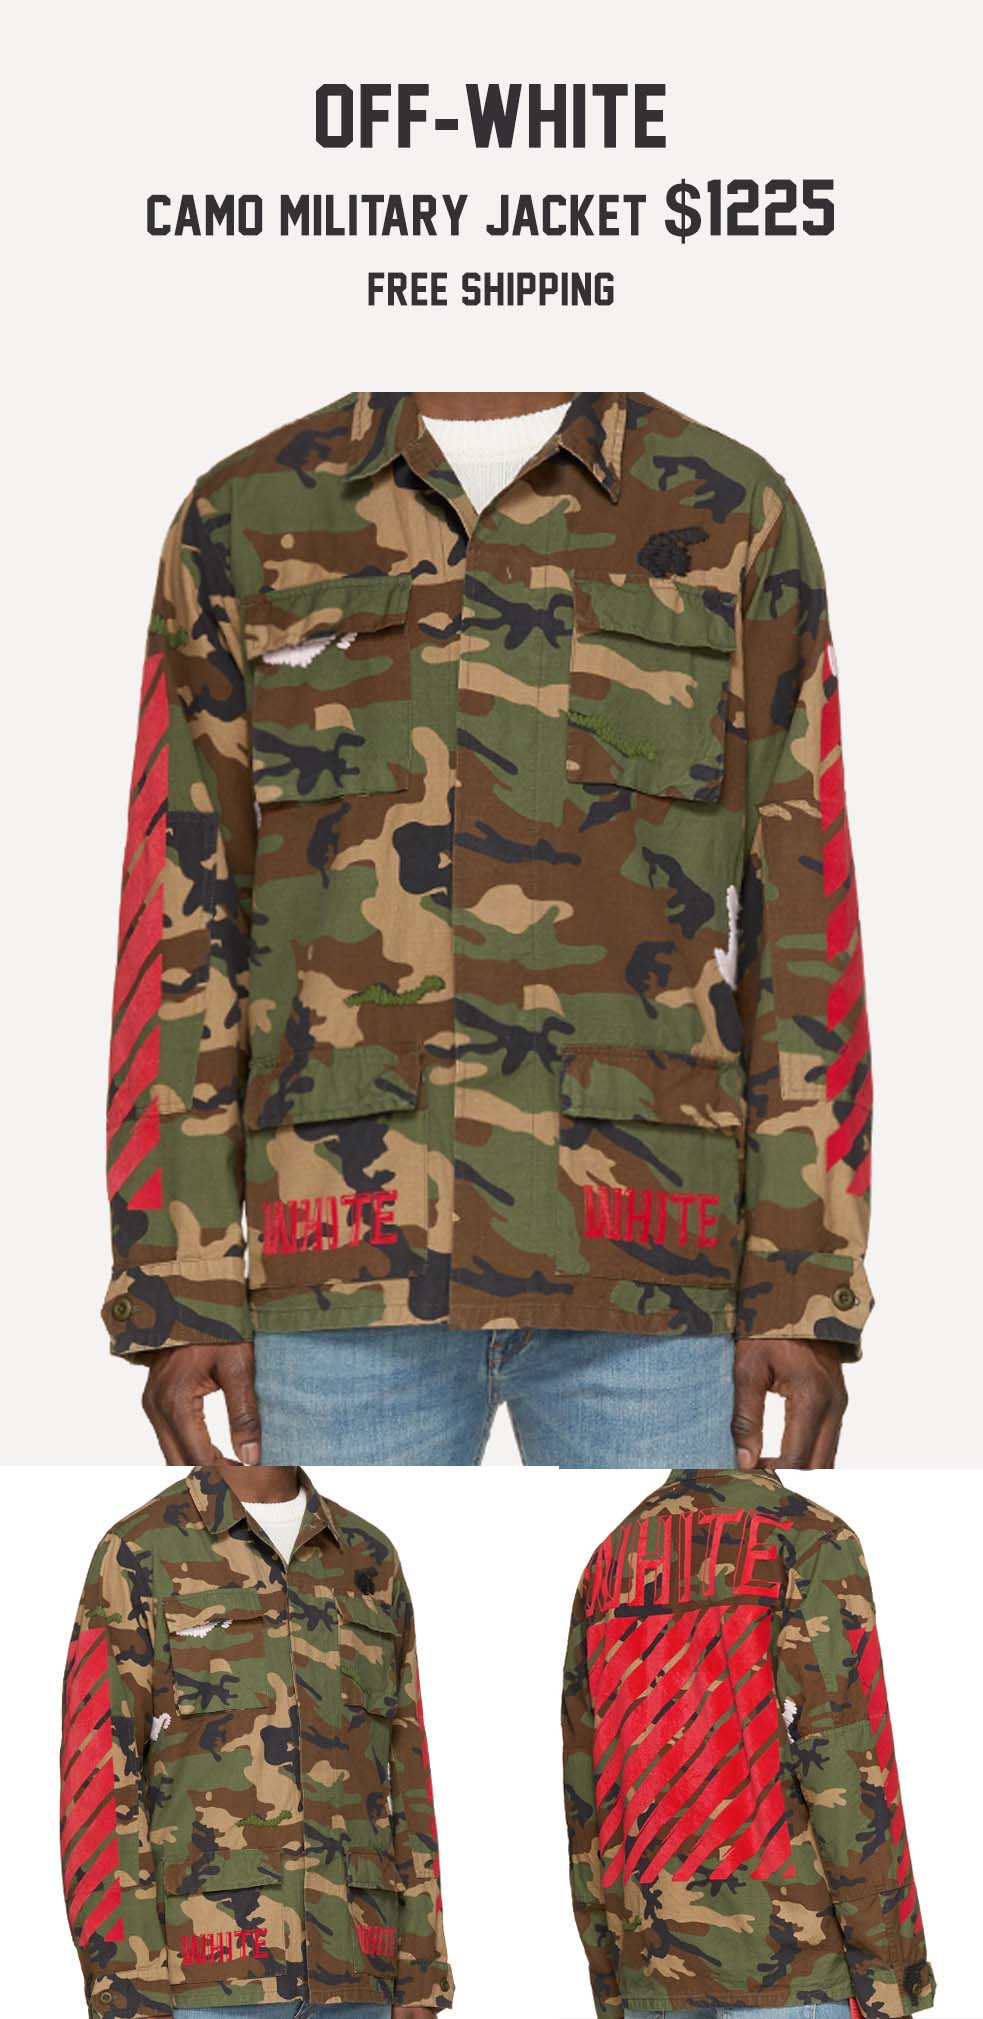 Stefan's Head - Fall Jackets Collection - Off White Camo Military Jacket